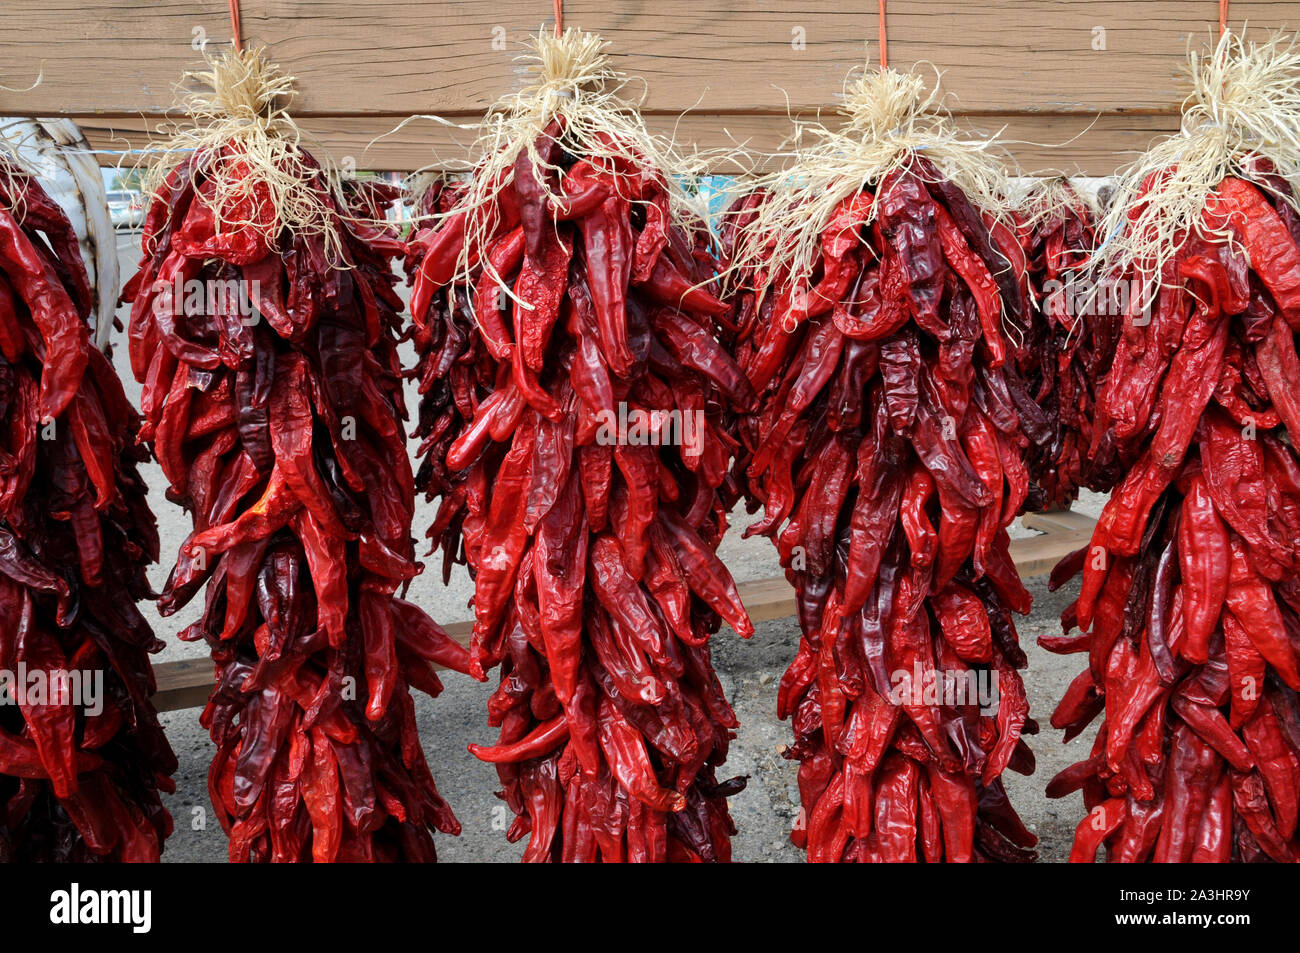 Chile (chille) peppers drying ouside a store in the town of Taos New Mexico USA. Stock Photo